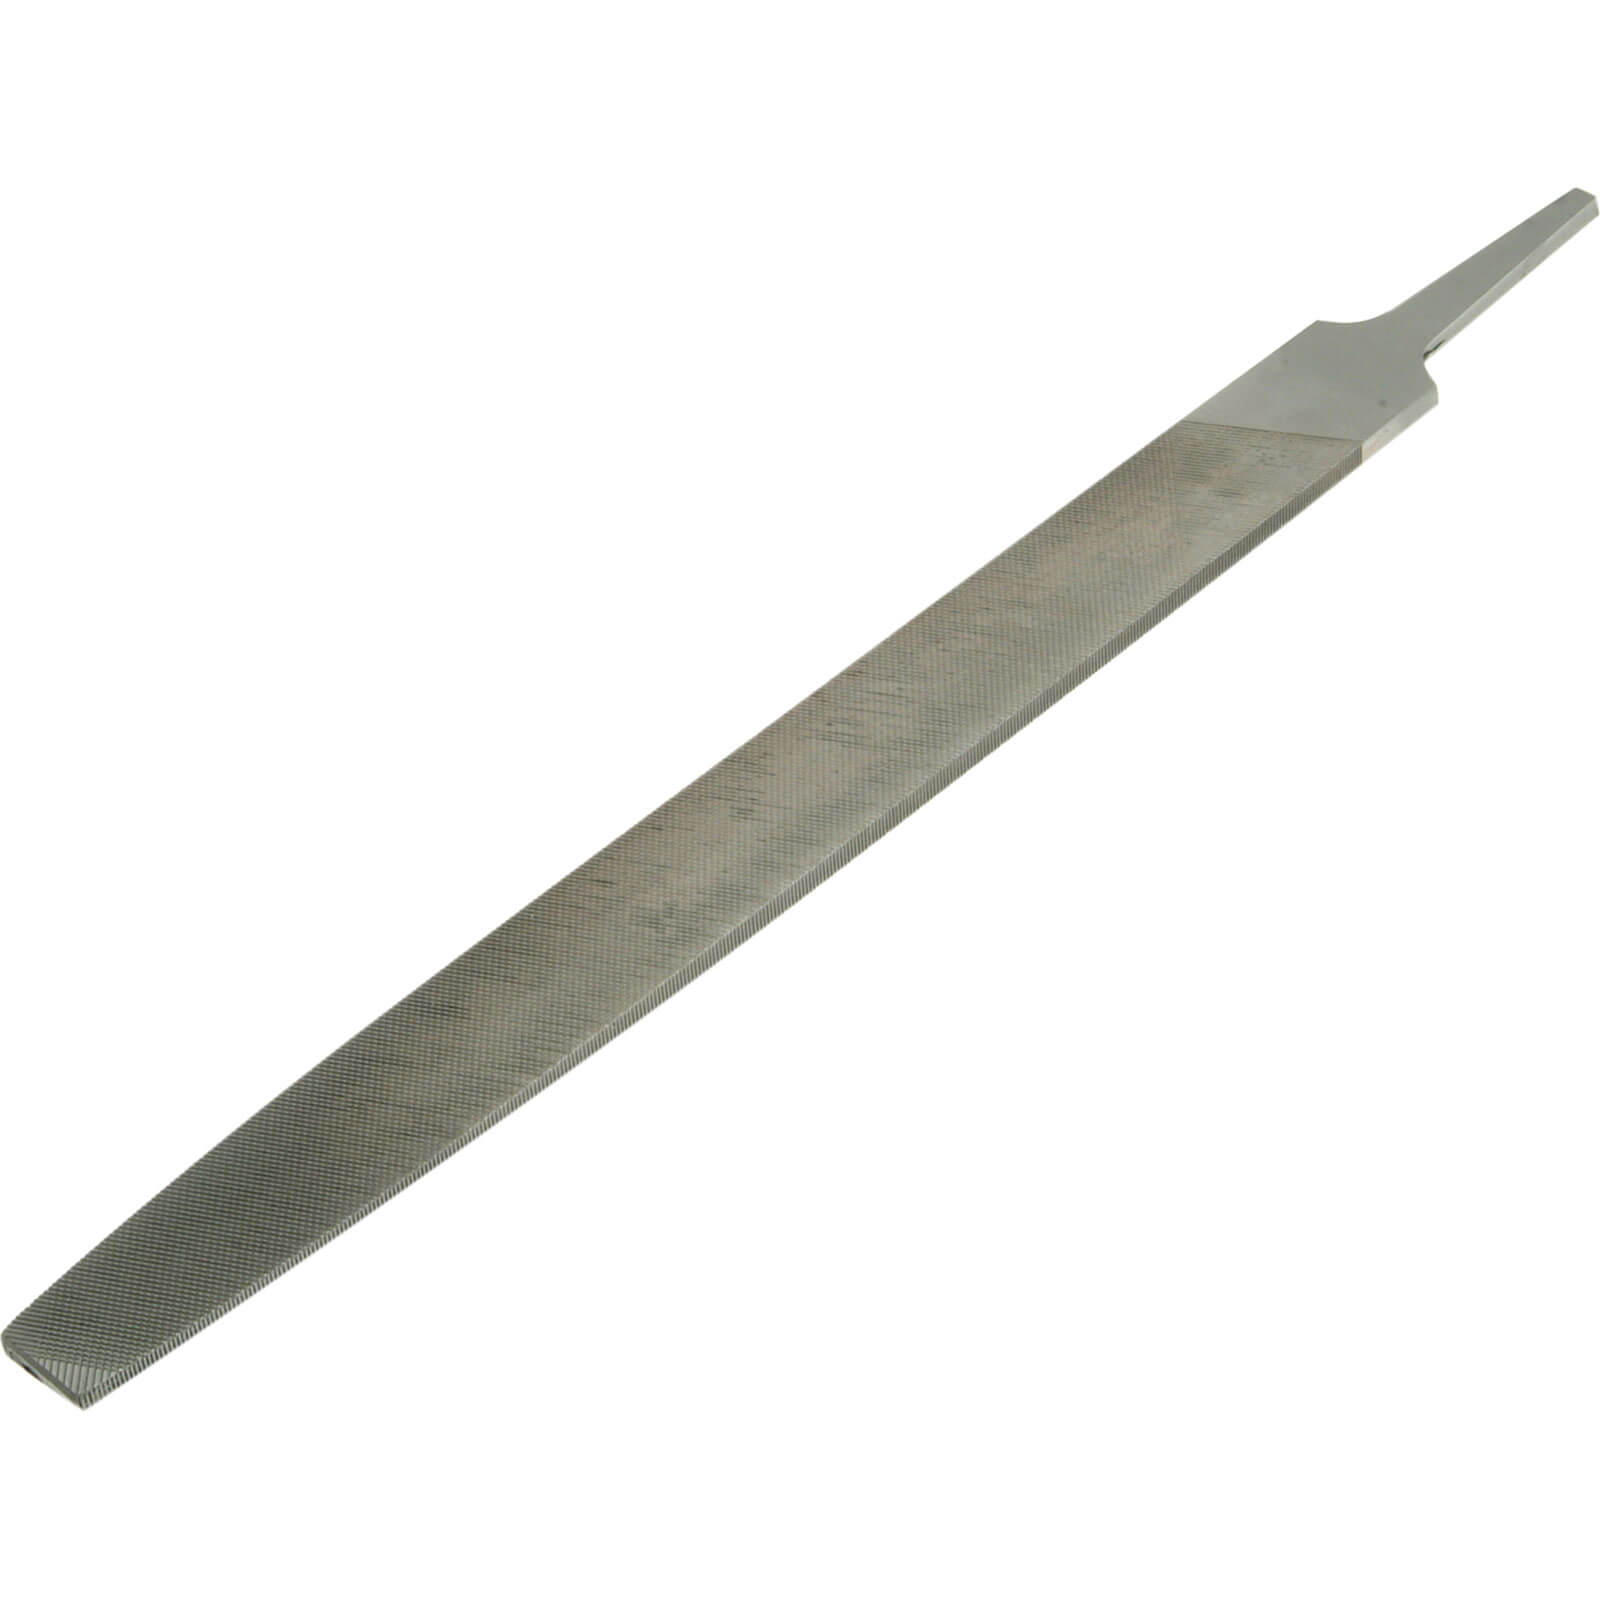 Bahco Flat Second Cut File 6"